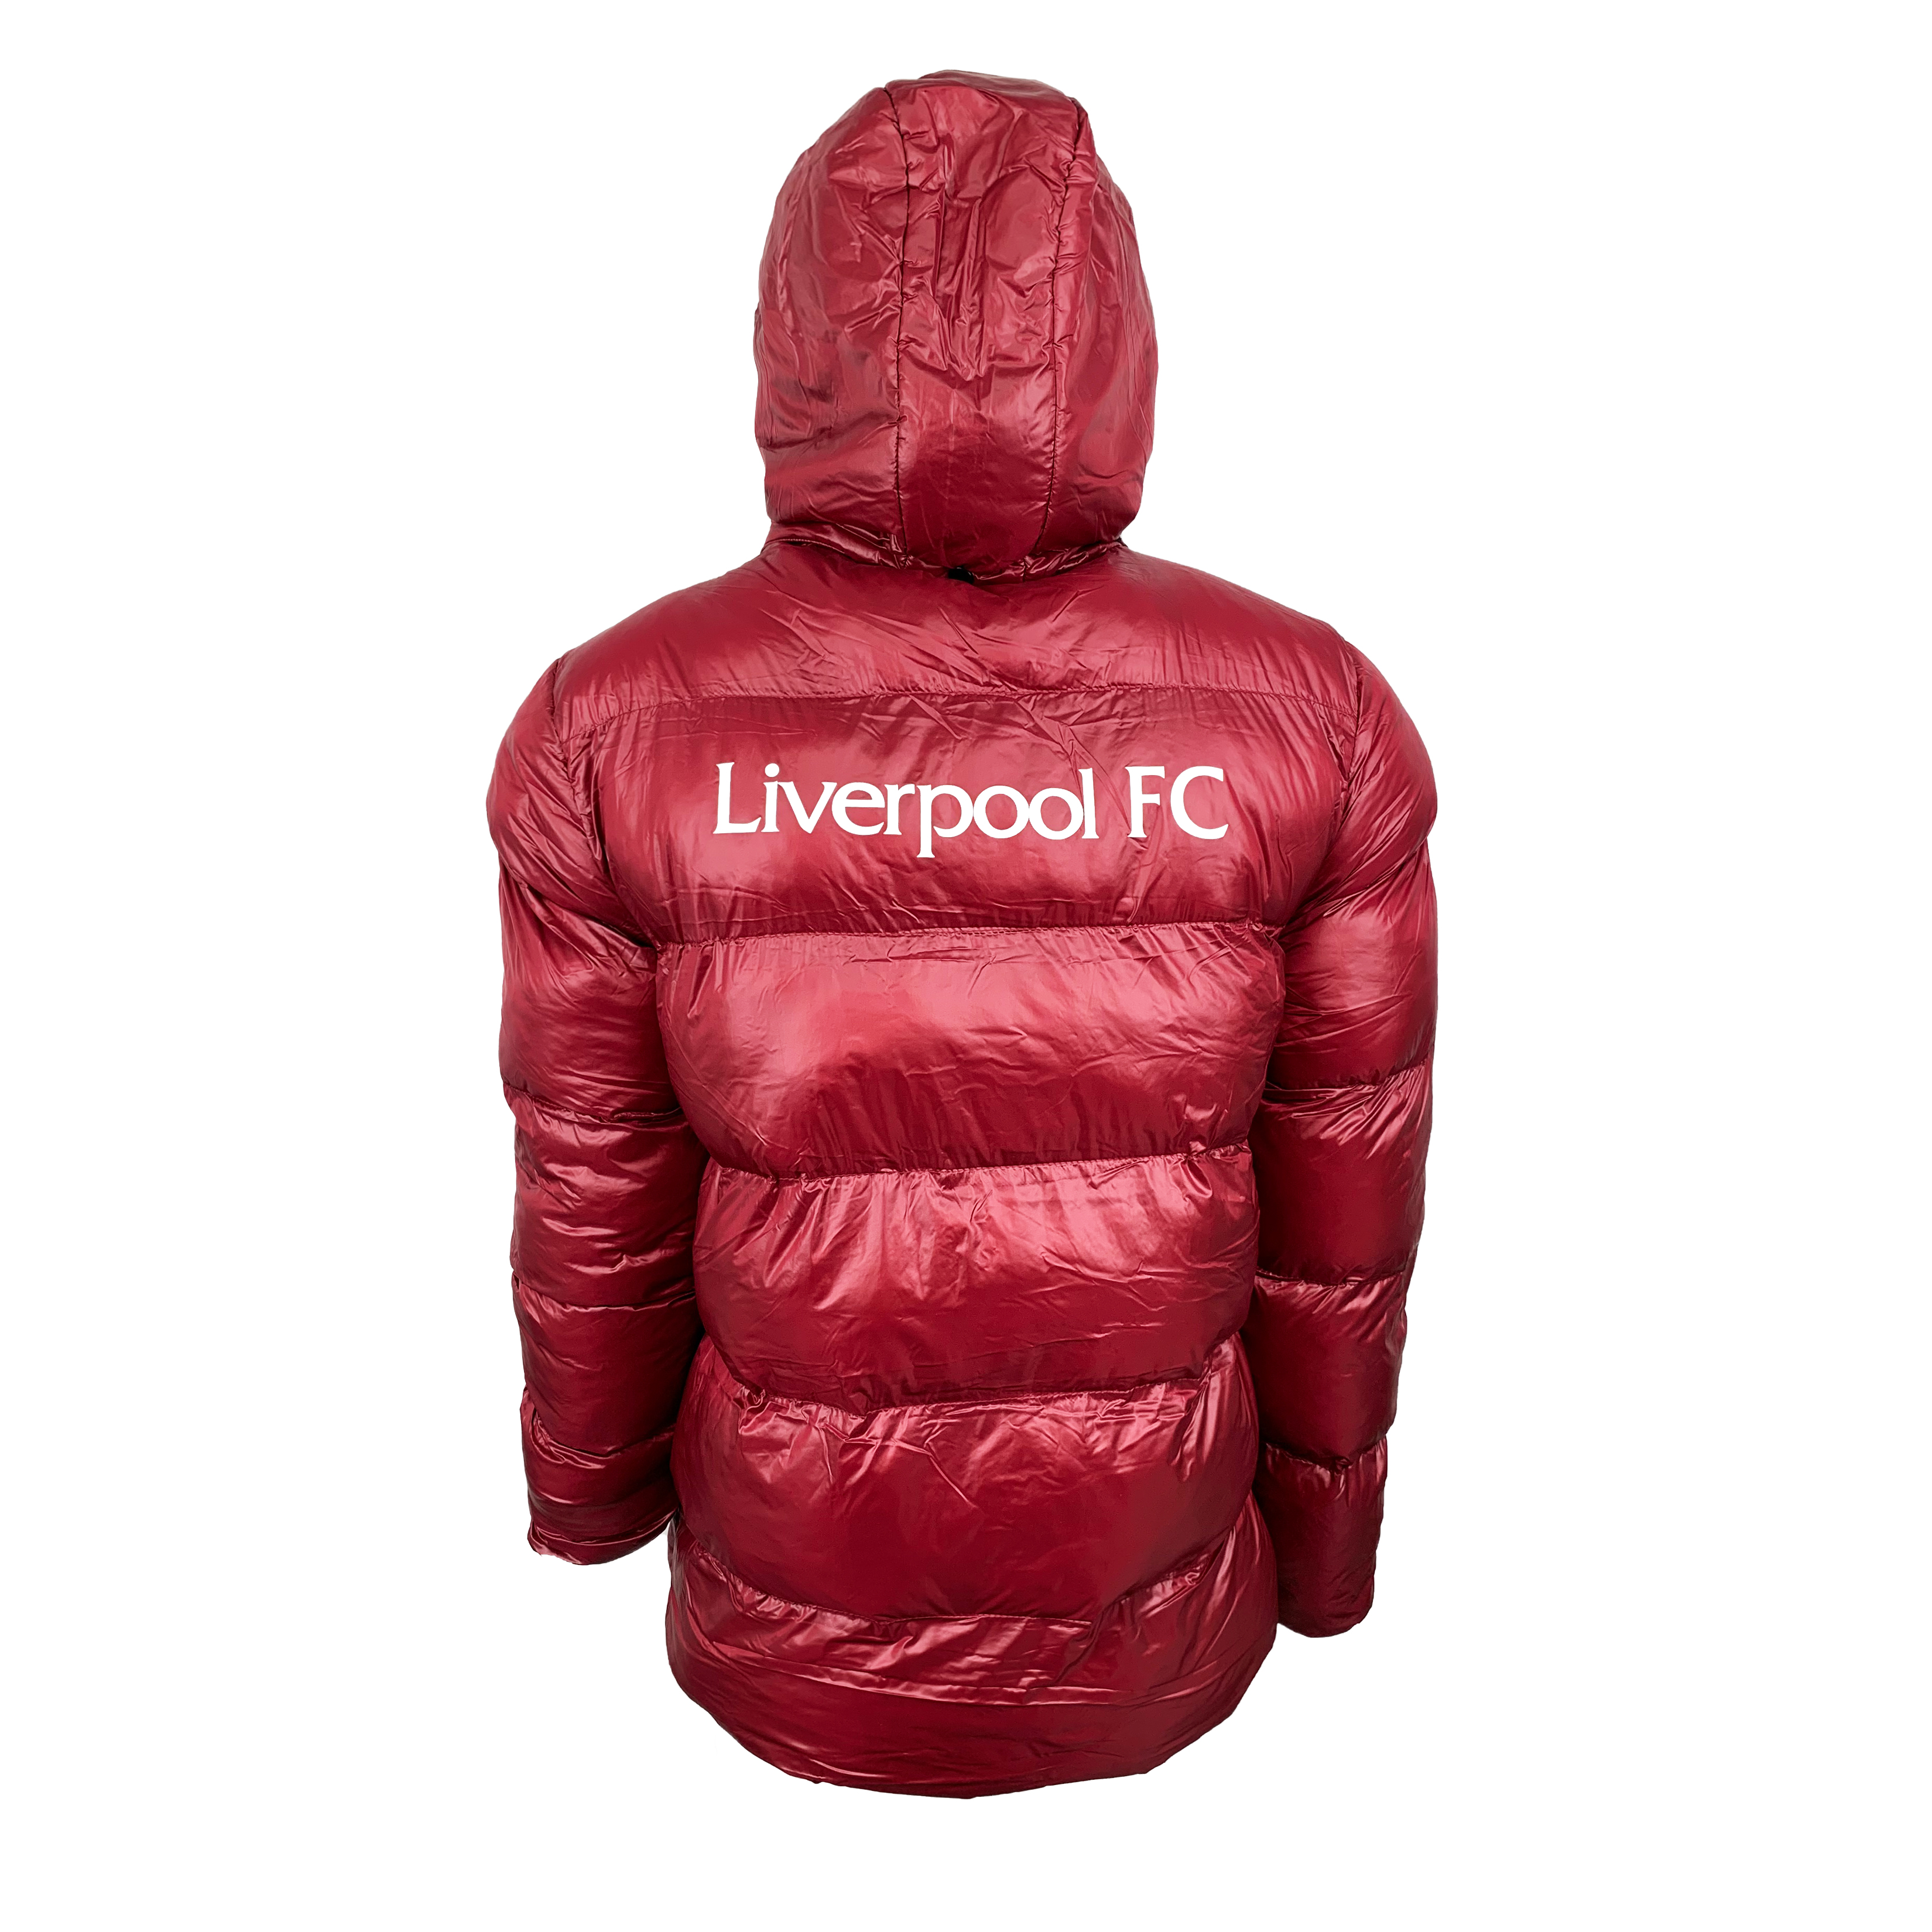 Liverpool Winter Jacket, With Removable Hood, Licensed Liverpool Puffer Jacket (YL) - image 3 of 5